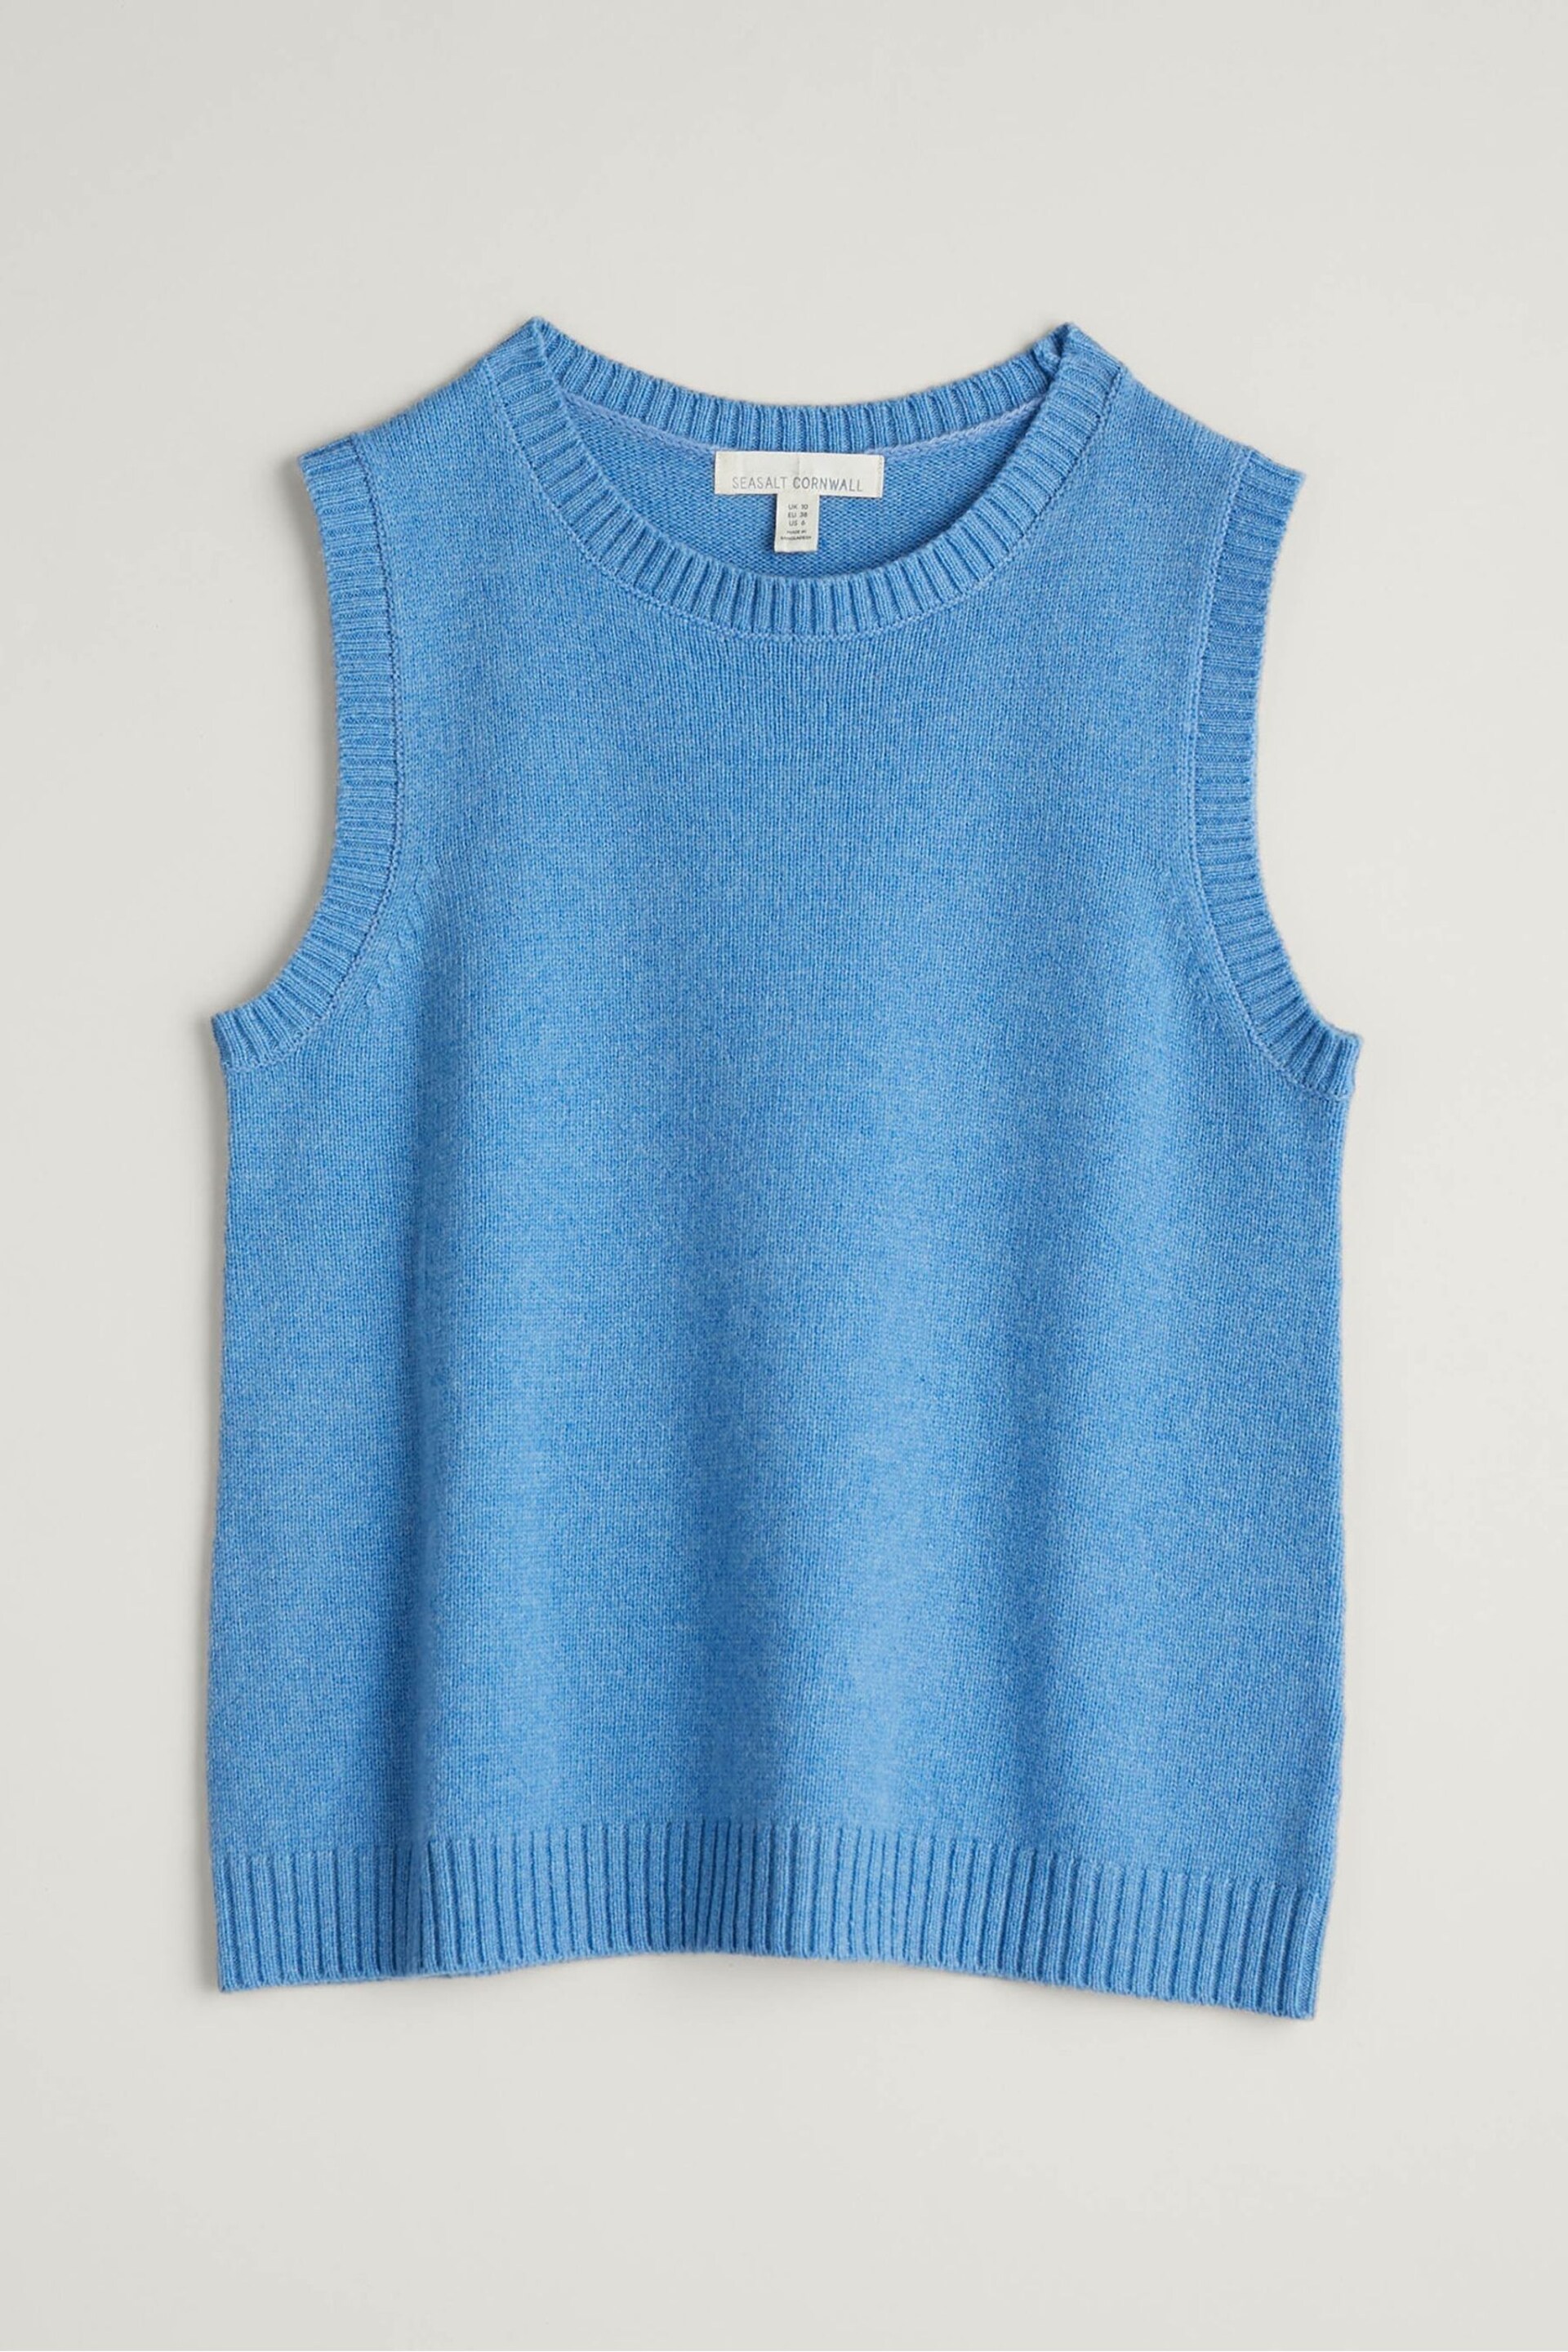 Seasalt Cornwall Blue East View Knitted Vest - Image 7 of 8